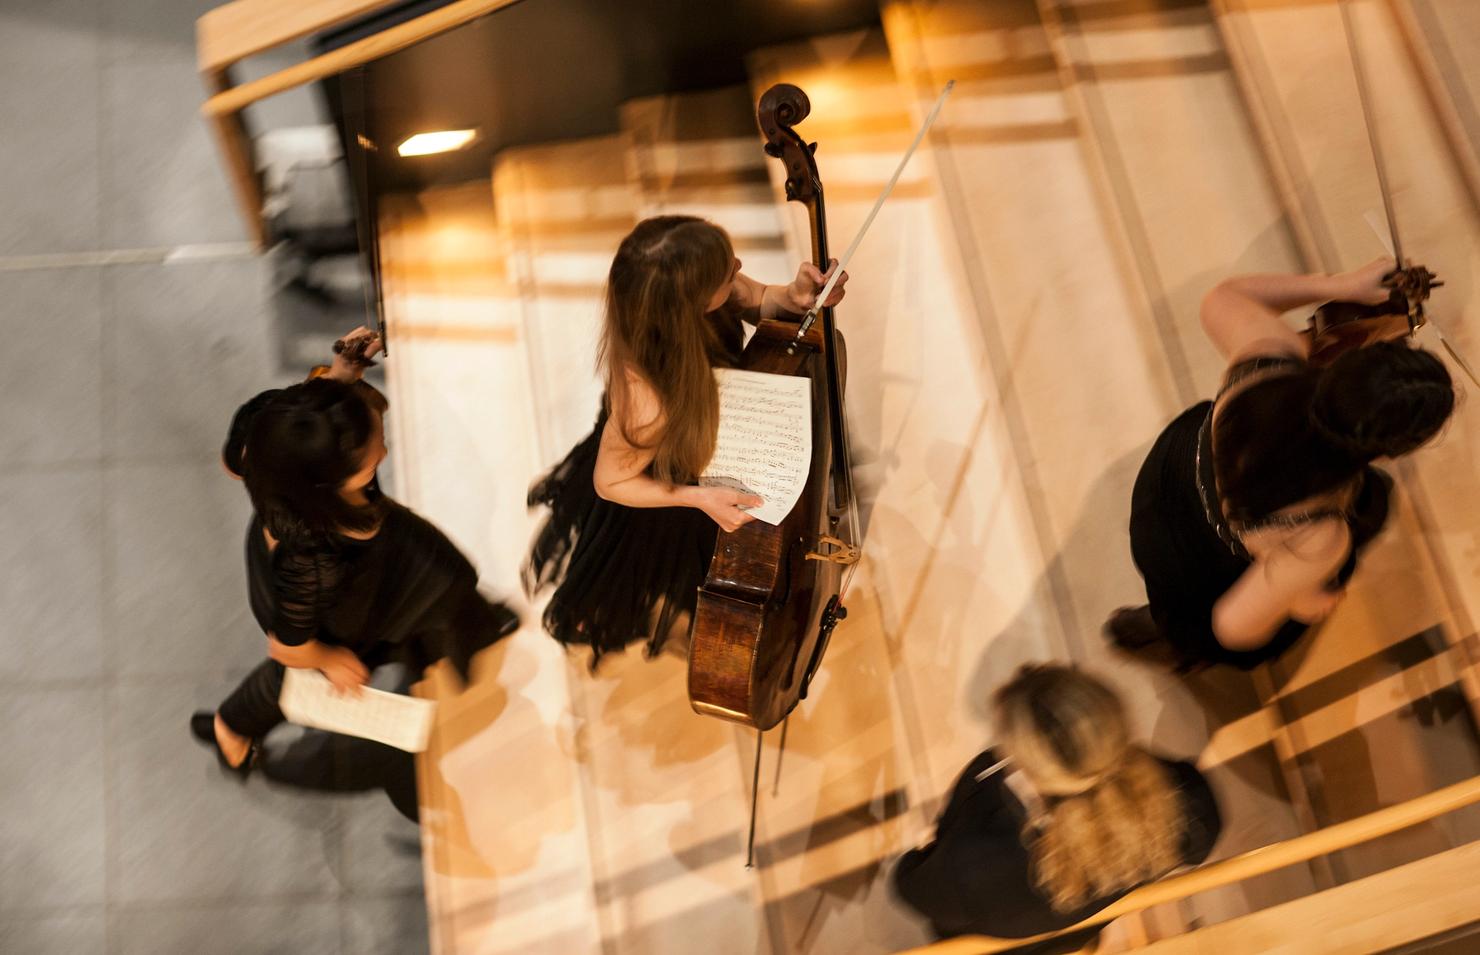 musicians moving up stairs with their instruments (cello, violin) in their hands photographed from above